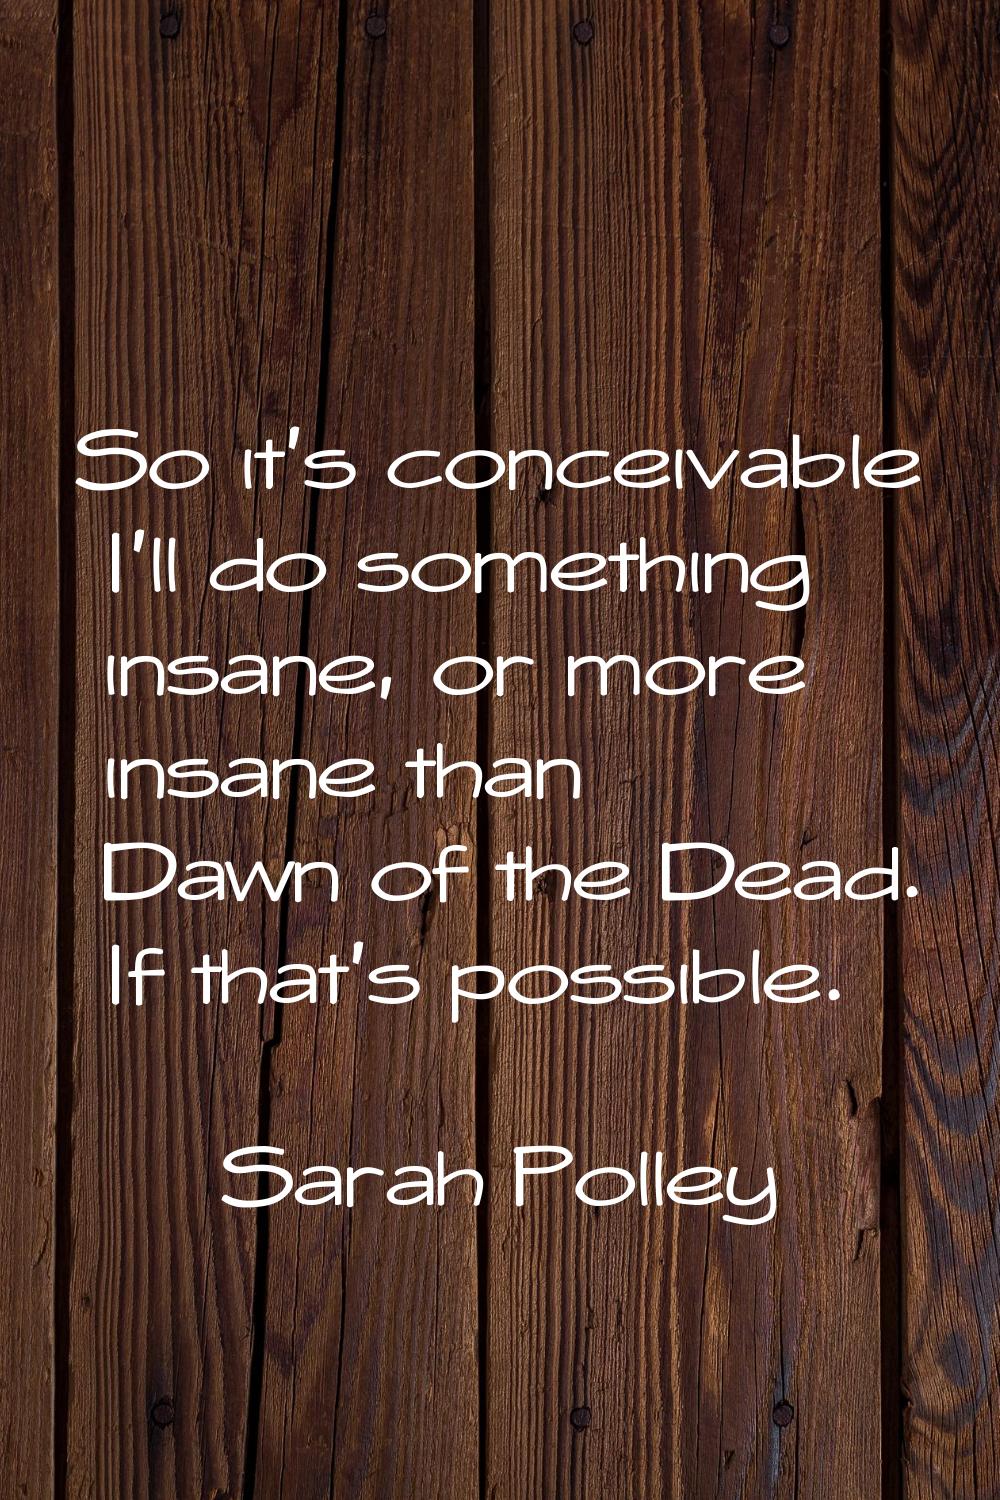 So it's conceivable I'll do something insane, or more insane than Dawn of the Dead. If that's possi